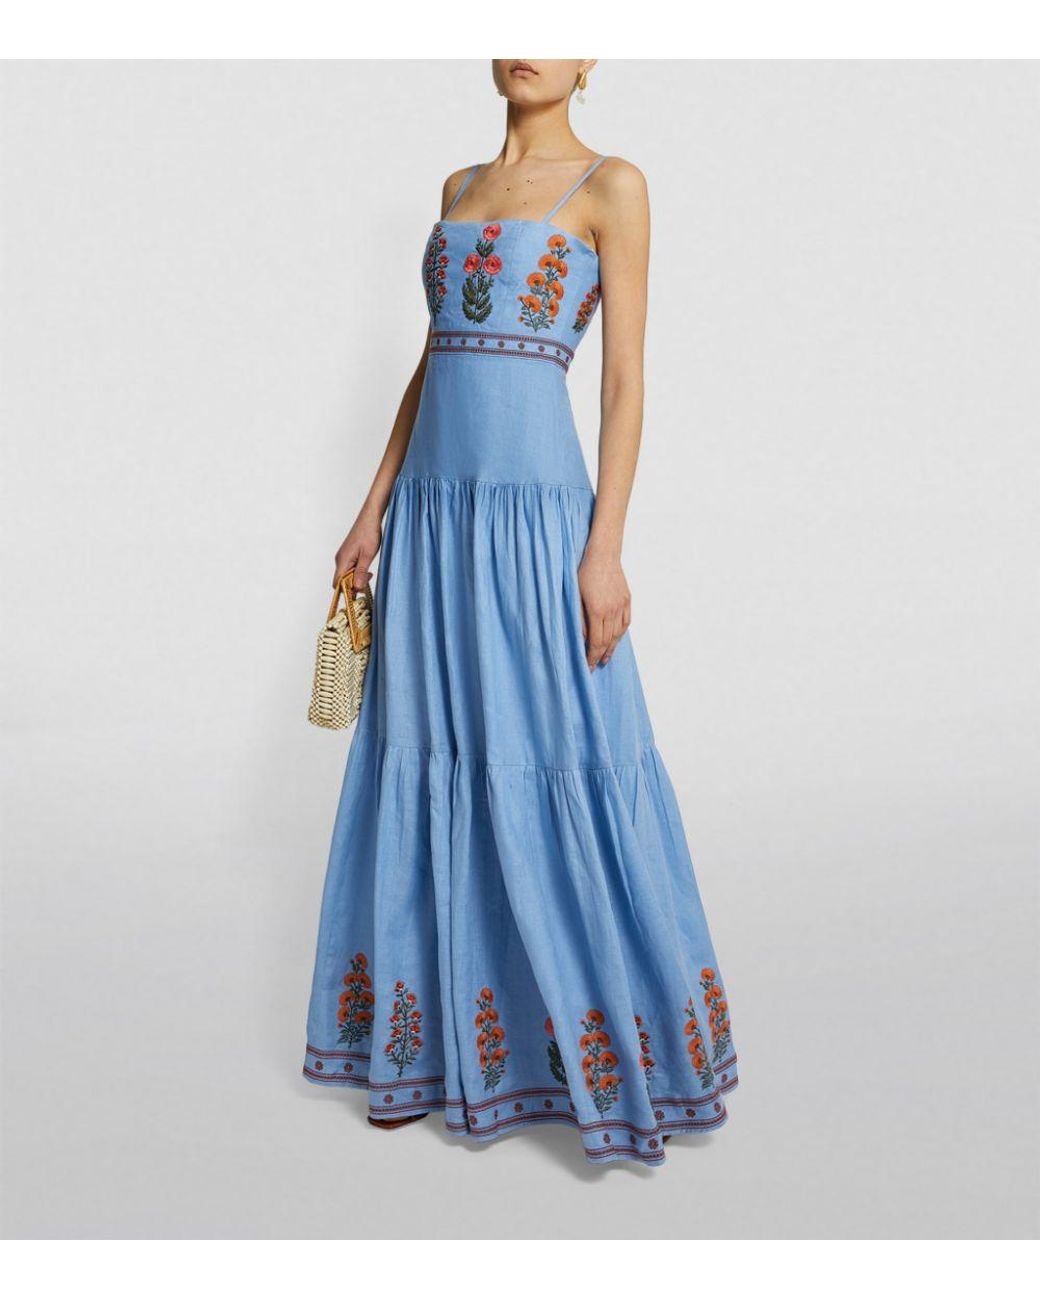 Agua by Agua Bendita Embroidered Floral Lima Dress in Blue | Lyst